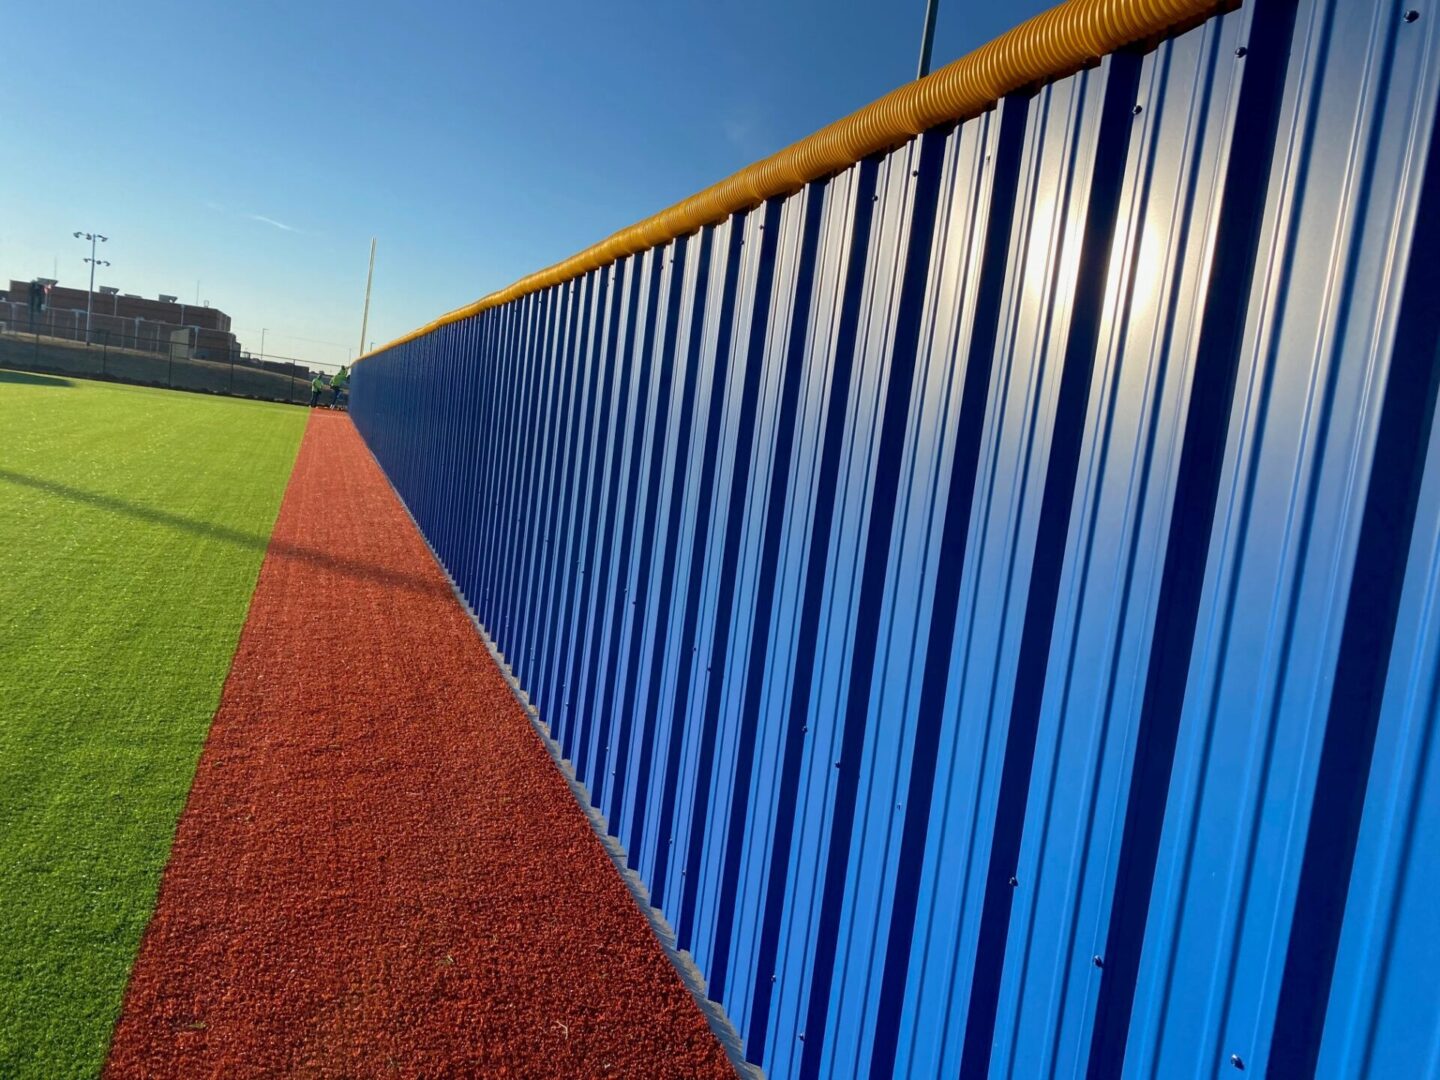 A baseball field with blue fence and red track.